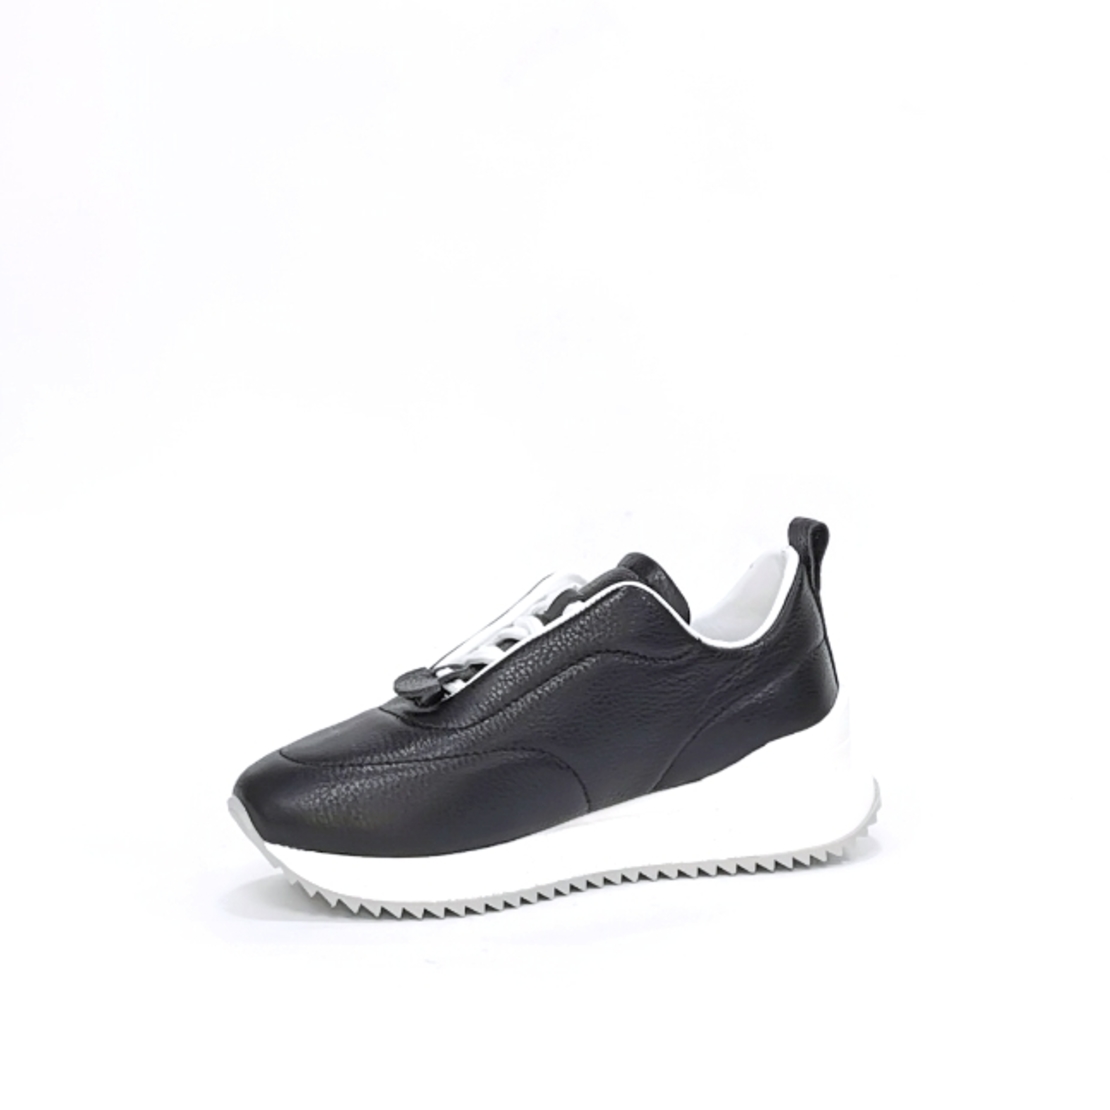 Women's sneaker made of natural leather in black color with anatomical insole/7800